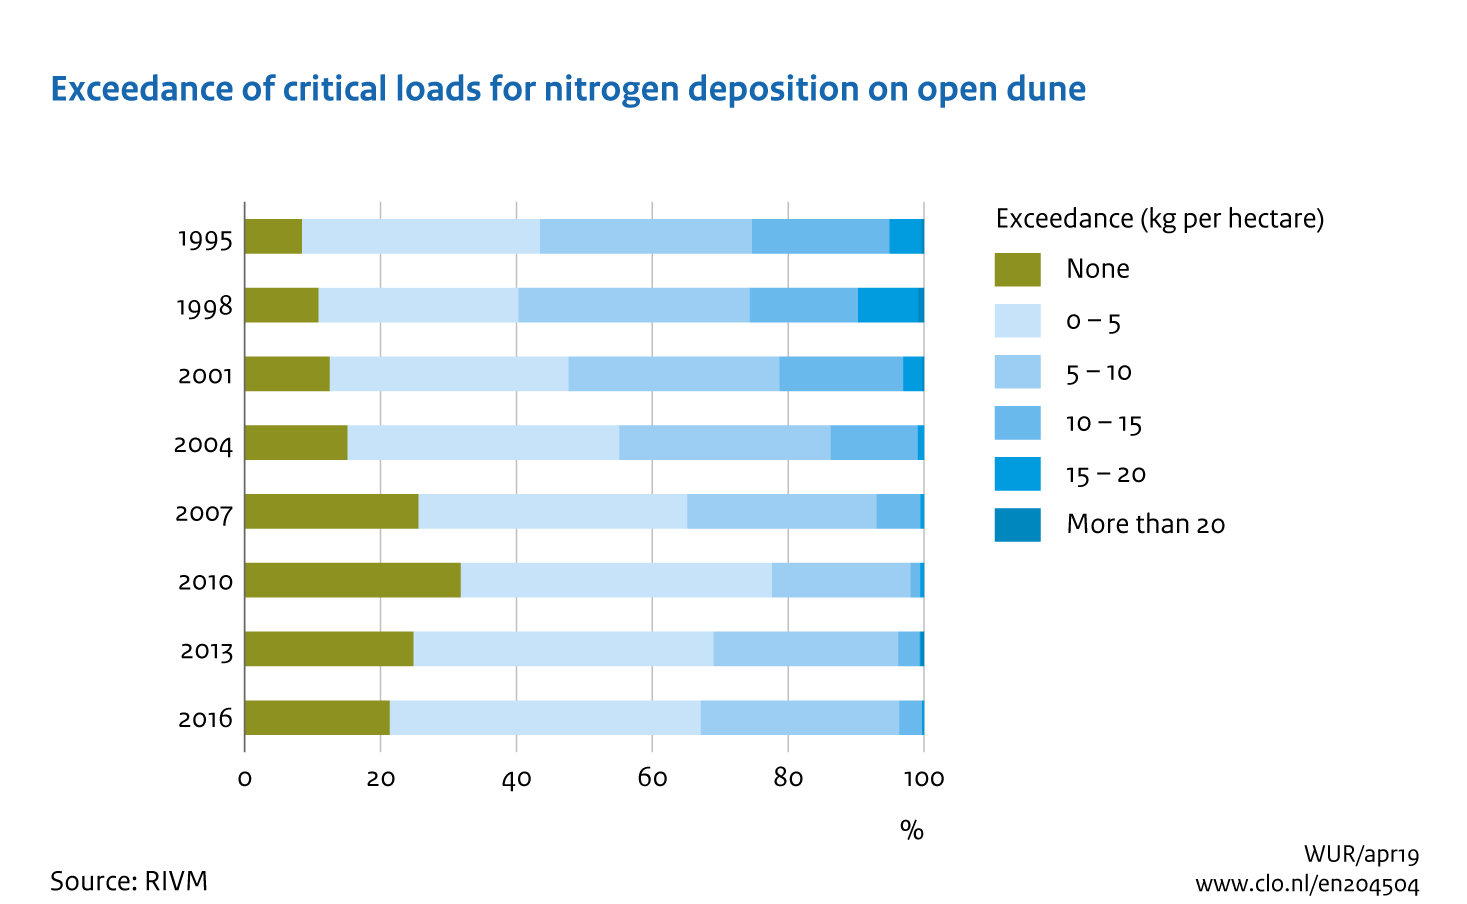 Image Exceedance of critical loads for nitrogen deposition on open dune. The image is further explained in the text.